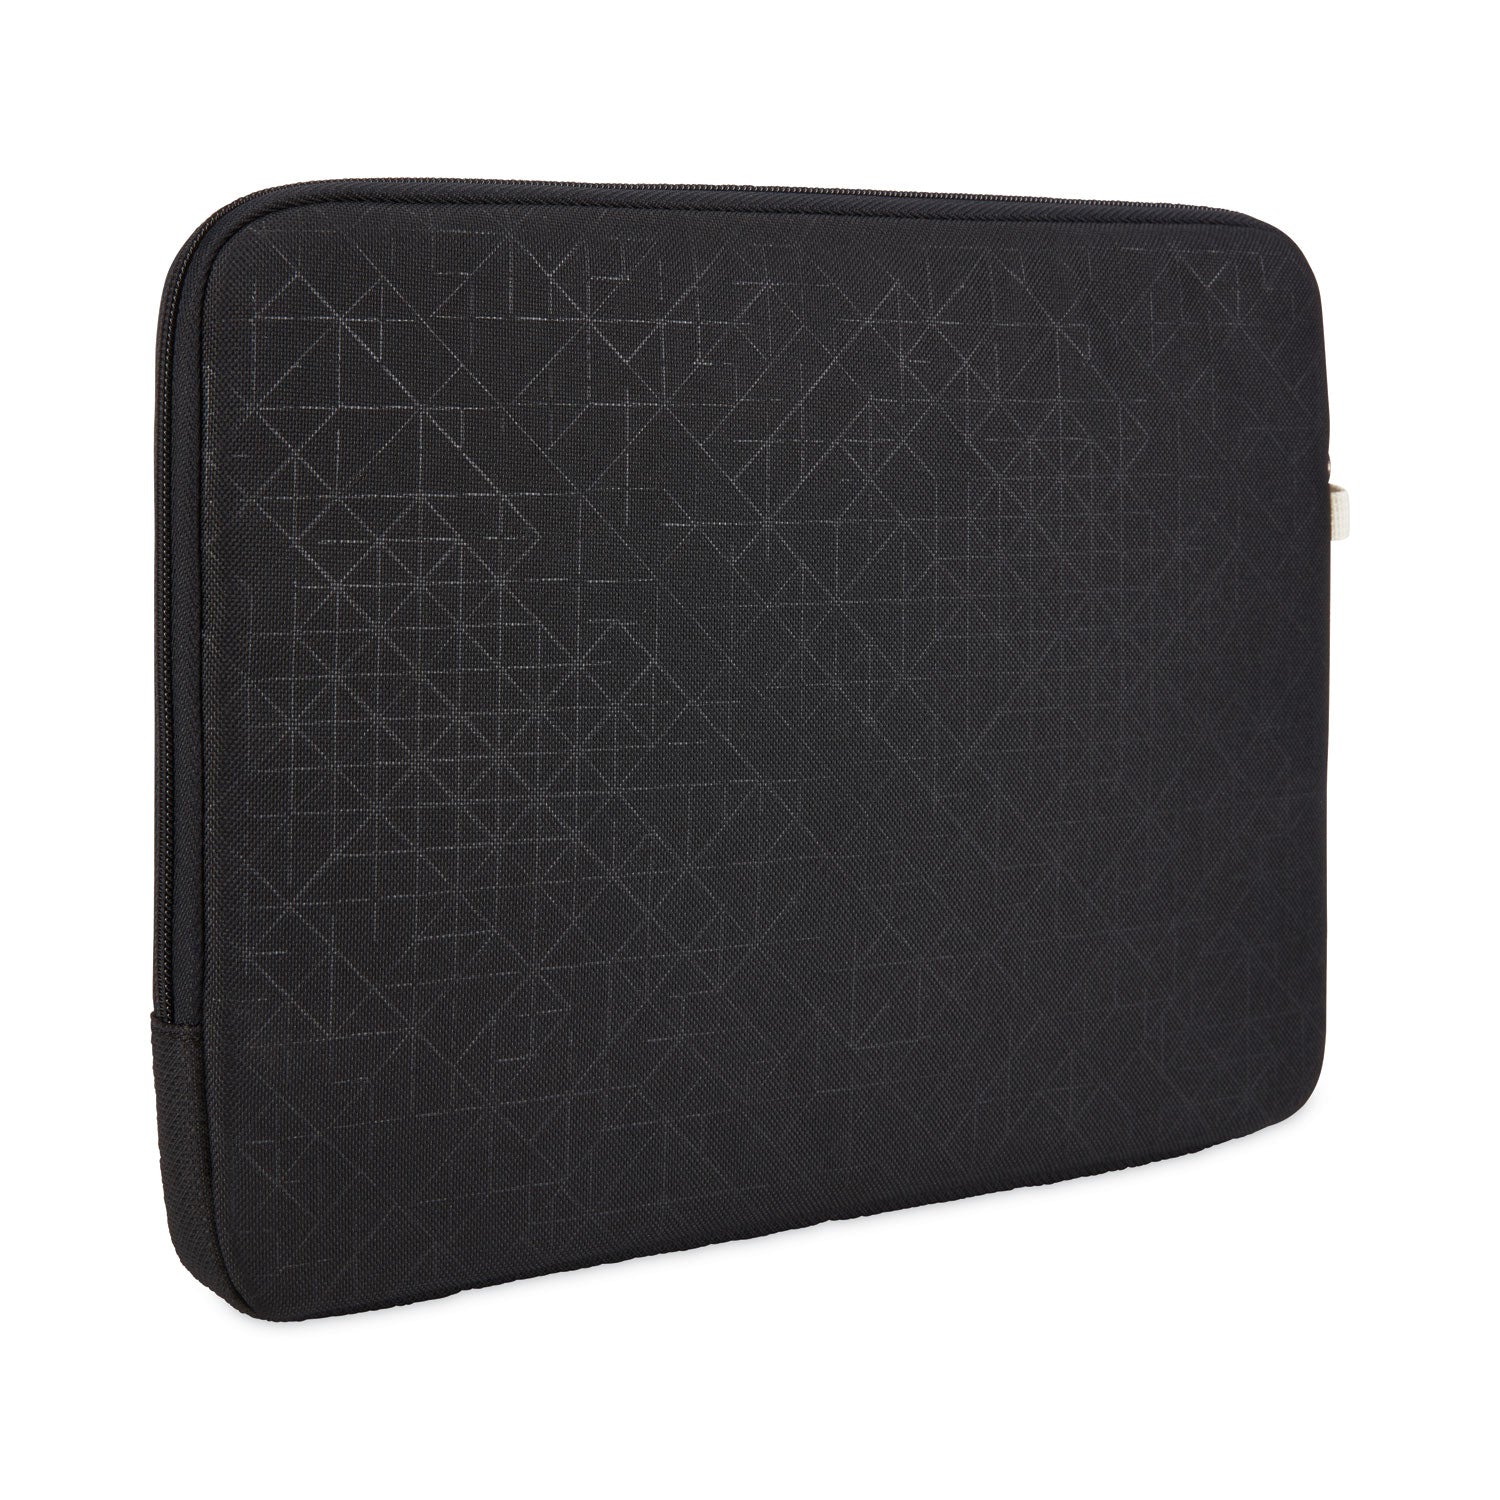 ibira-laptop-sleeve-fits-devices-up-to-116-polyester-126-x-12-x-94-black_clg3204389 - 3